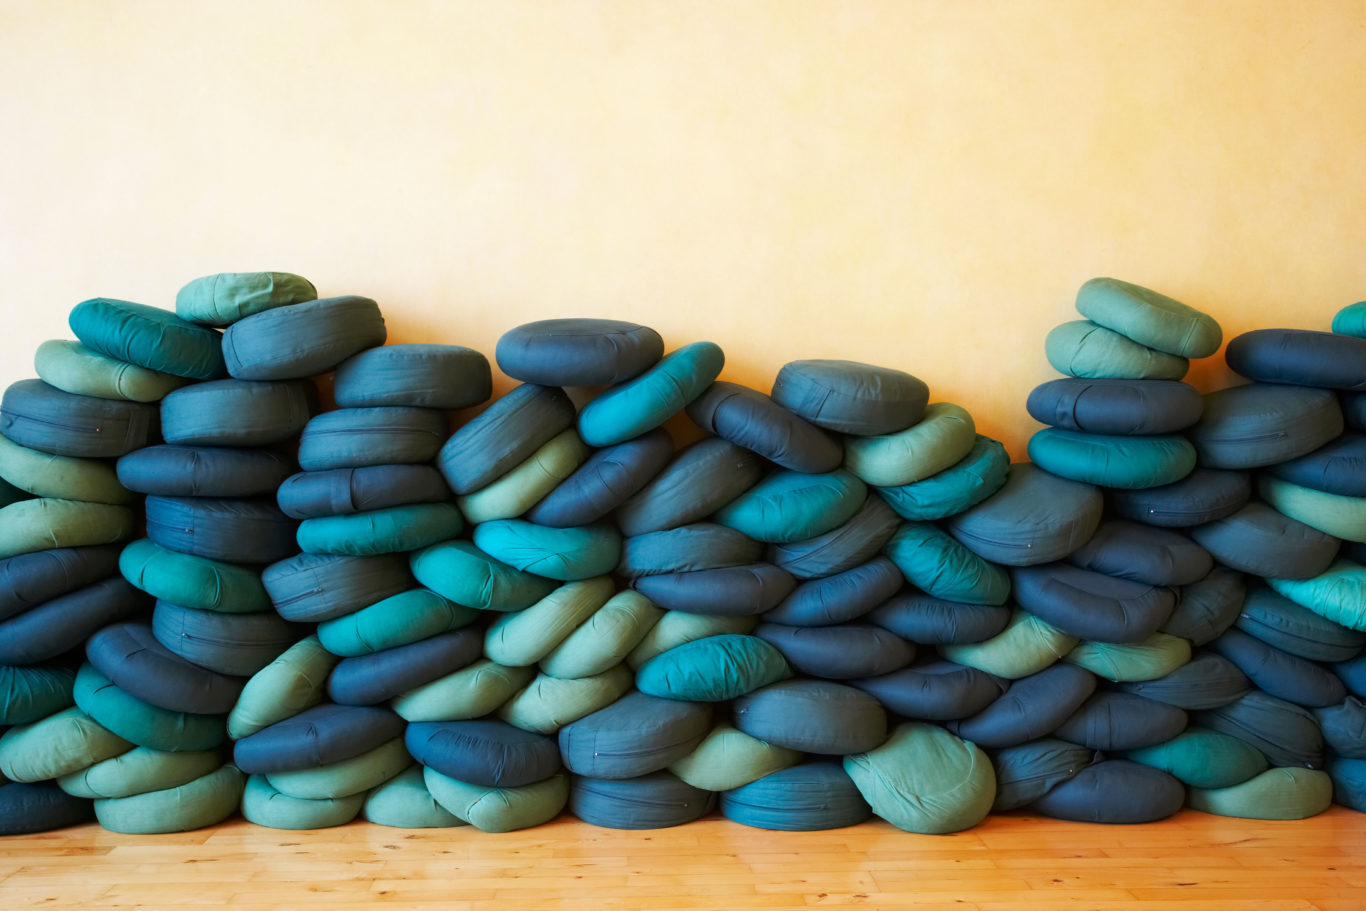 buddhist meditation cushions stacked against a wall